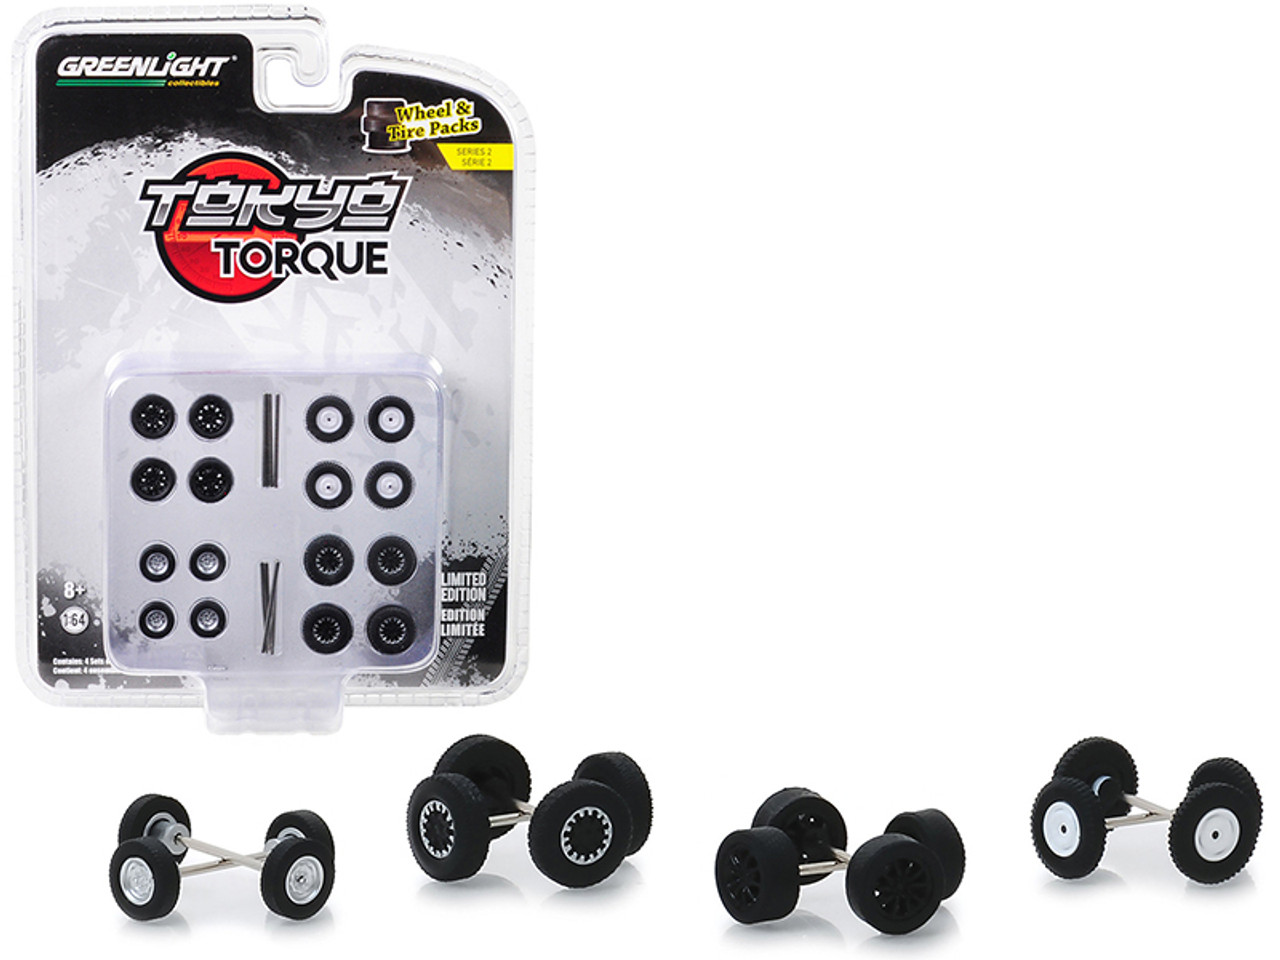 "Tokyo Torque" Wheels and Tires Multipack Set of 24 pieces "Wheel & Tire Packs" Series 2 1/64 by Greenlight